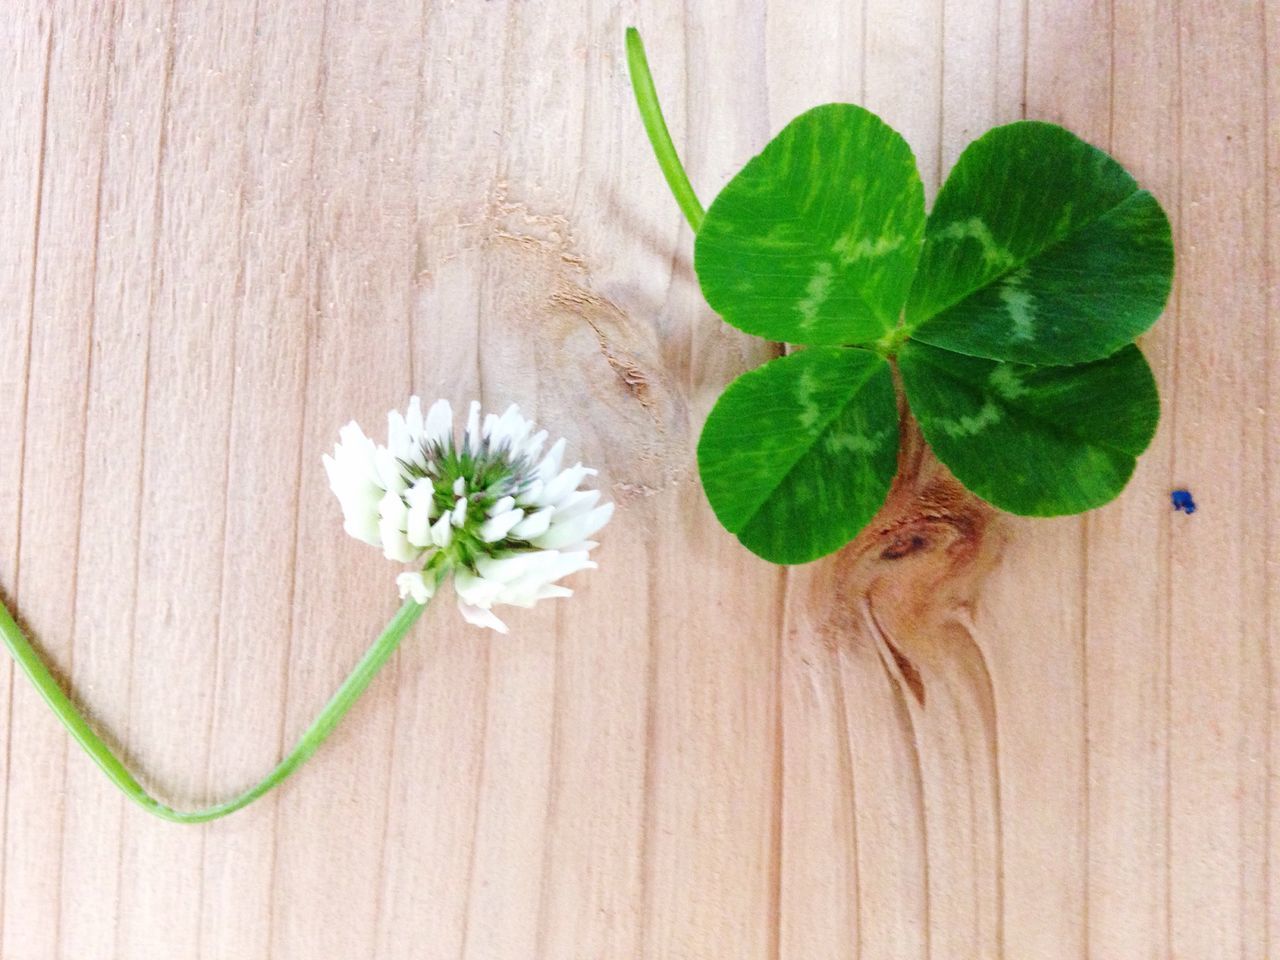 flower, freshness, leaf, wood - material, high angle view, table, indoors, growth, fragility, white color, petal, close-up, plant, wooden, green color, nature, flower head, beauty in nature, directly above, no people